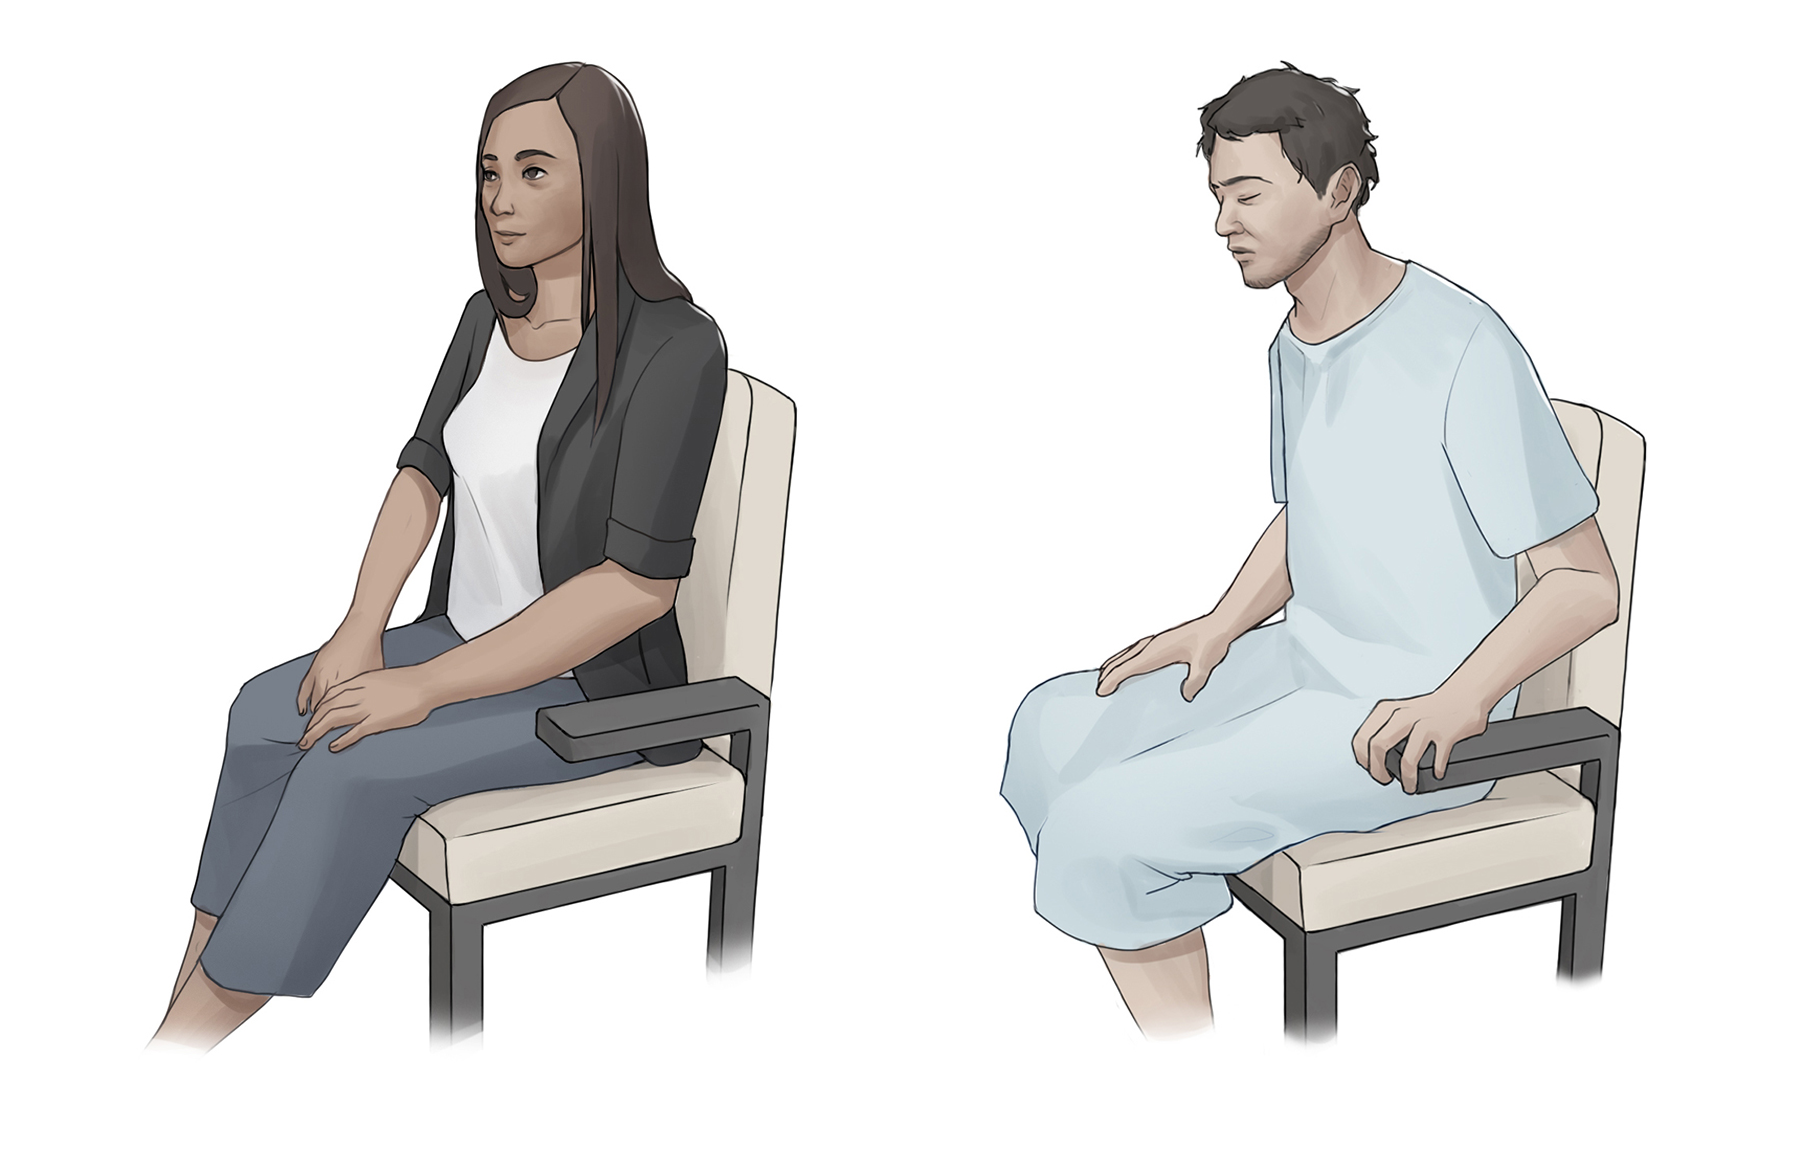 To the left, a person sitting in a chair who is well-dressed and appears calm. To the right, a different person in a hospital gown sitting in a chair who appears to be distressed and in physical discomfort.